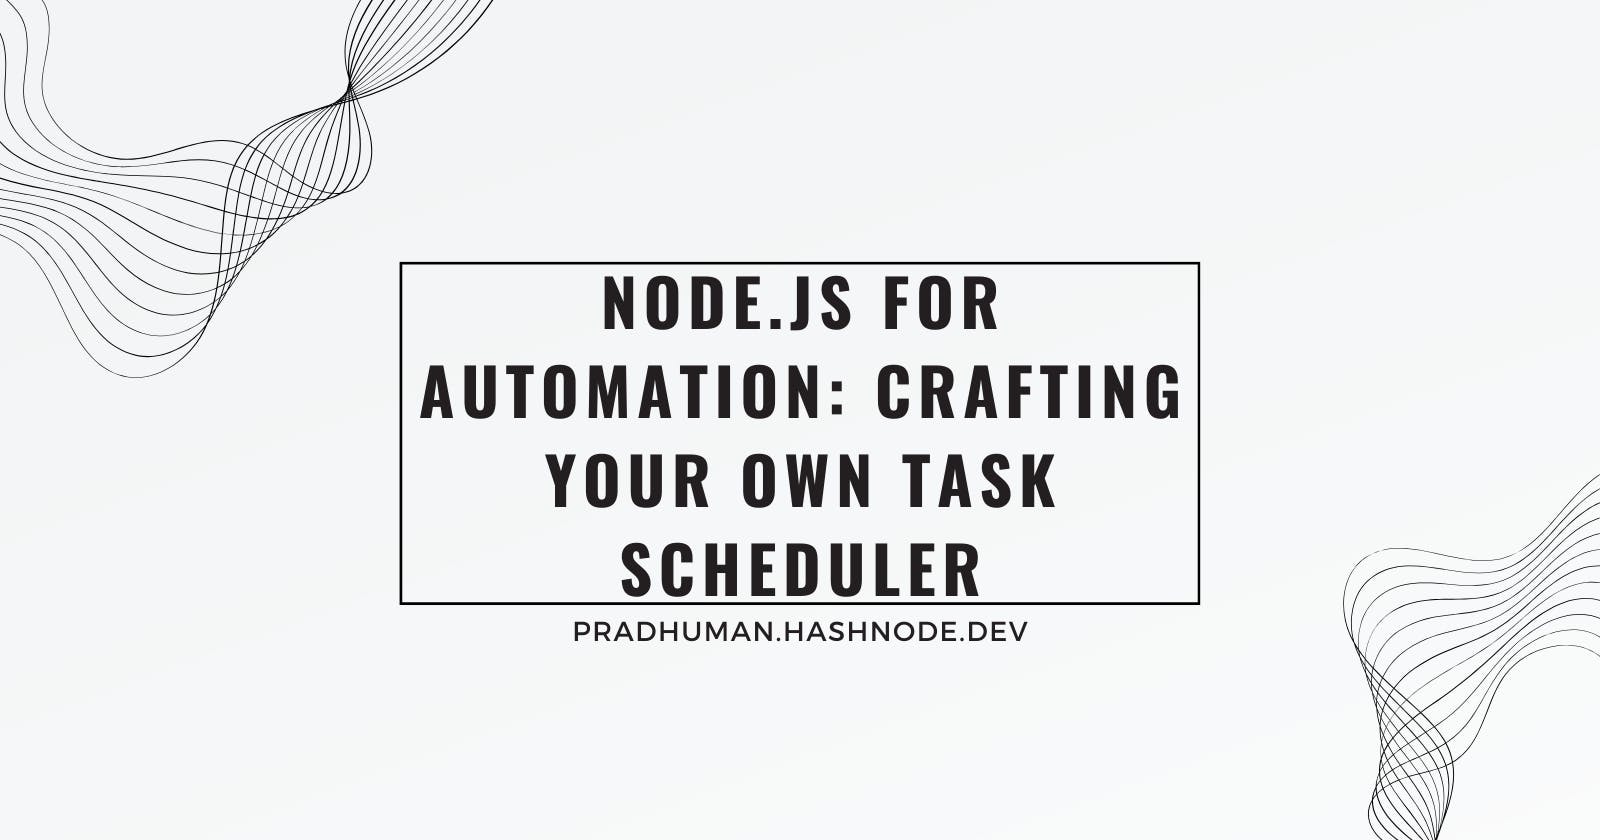 Node.js for Automation: Crafting Your Own Task Scheduler